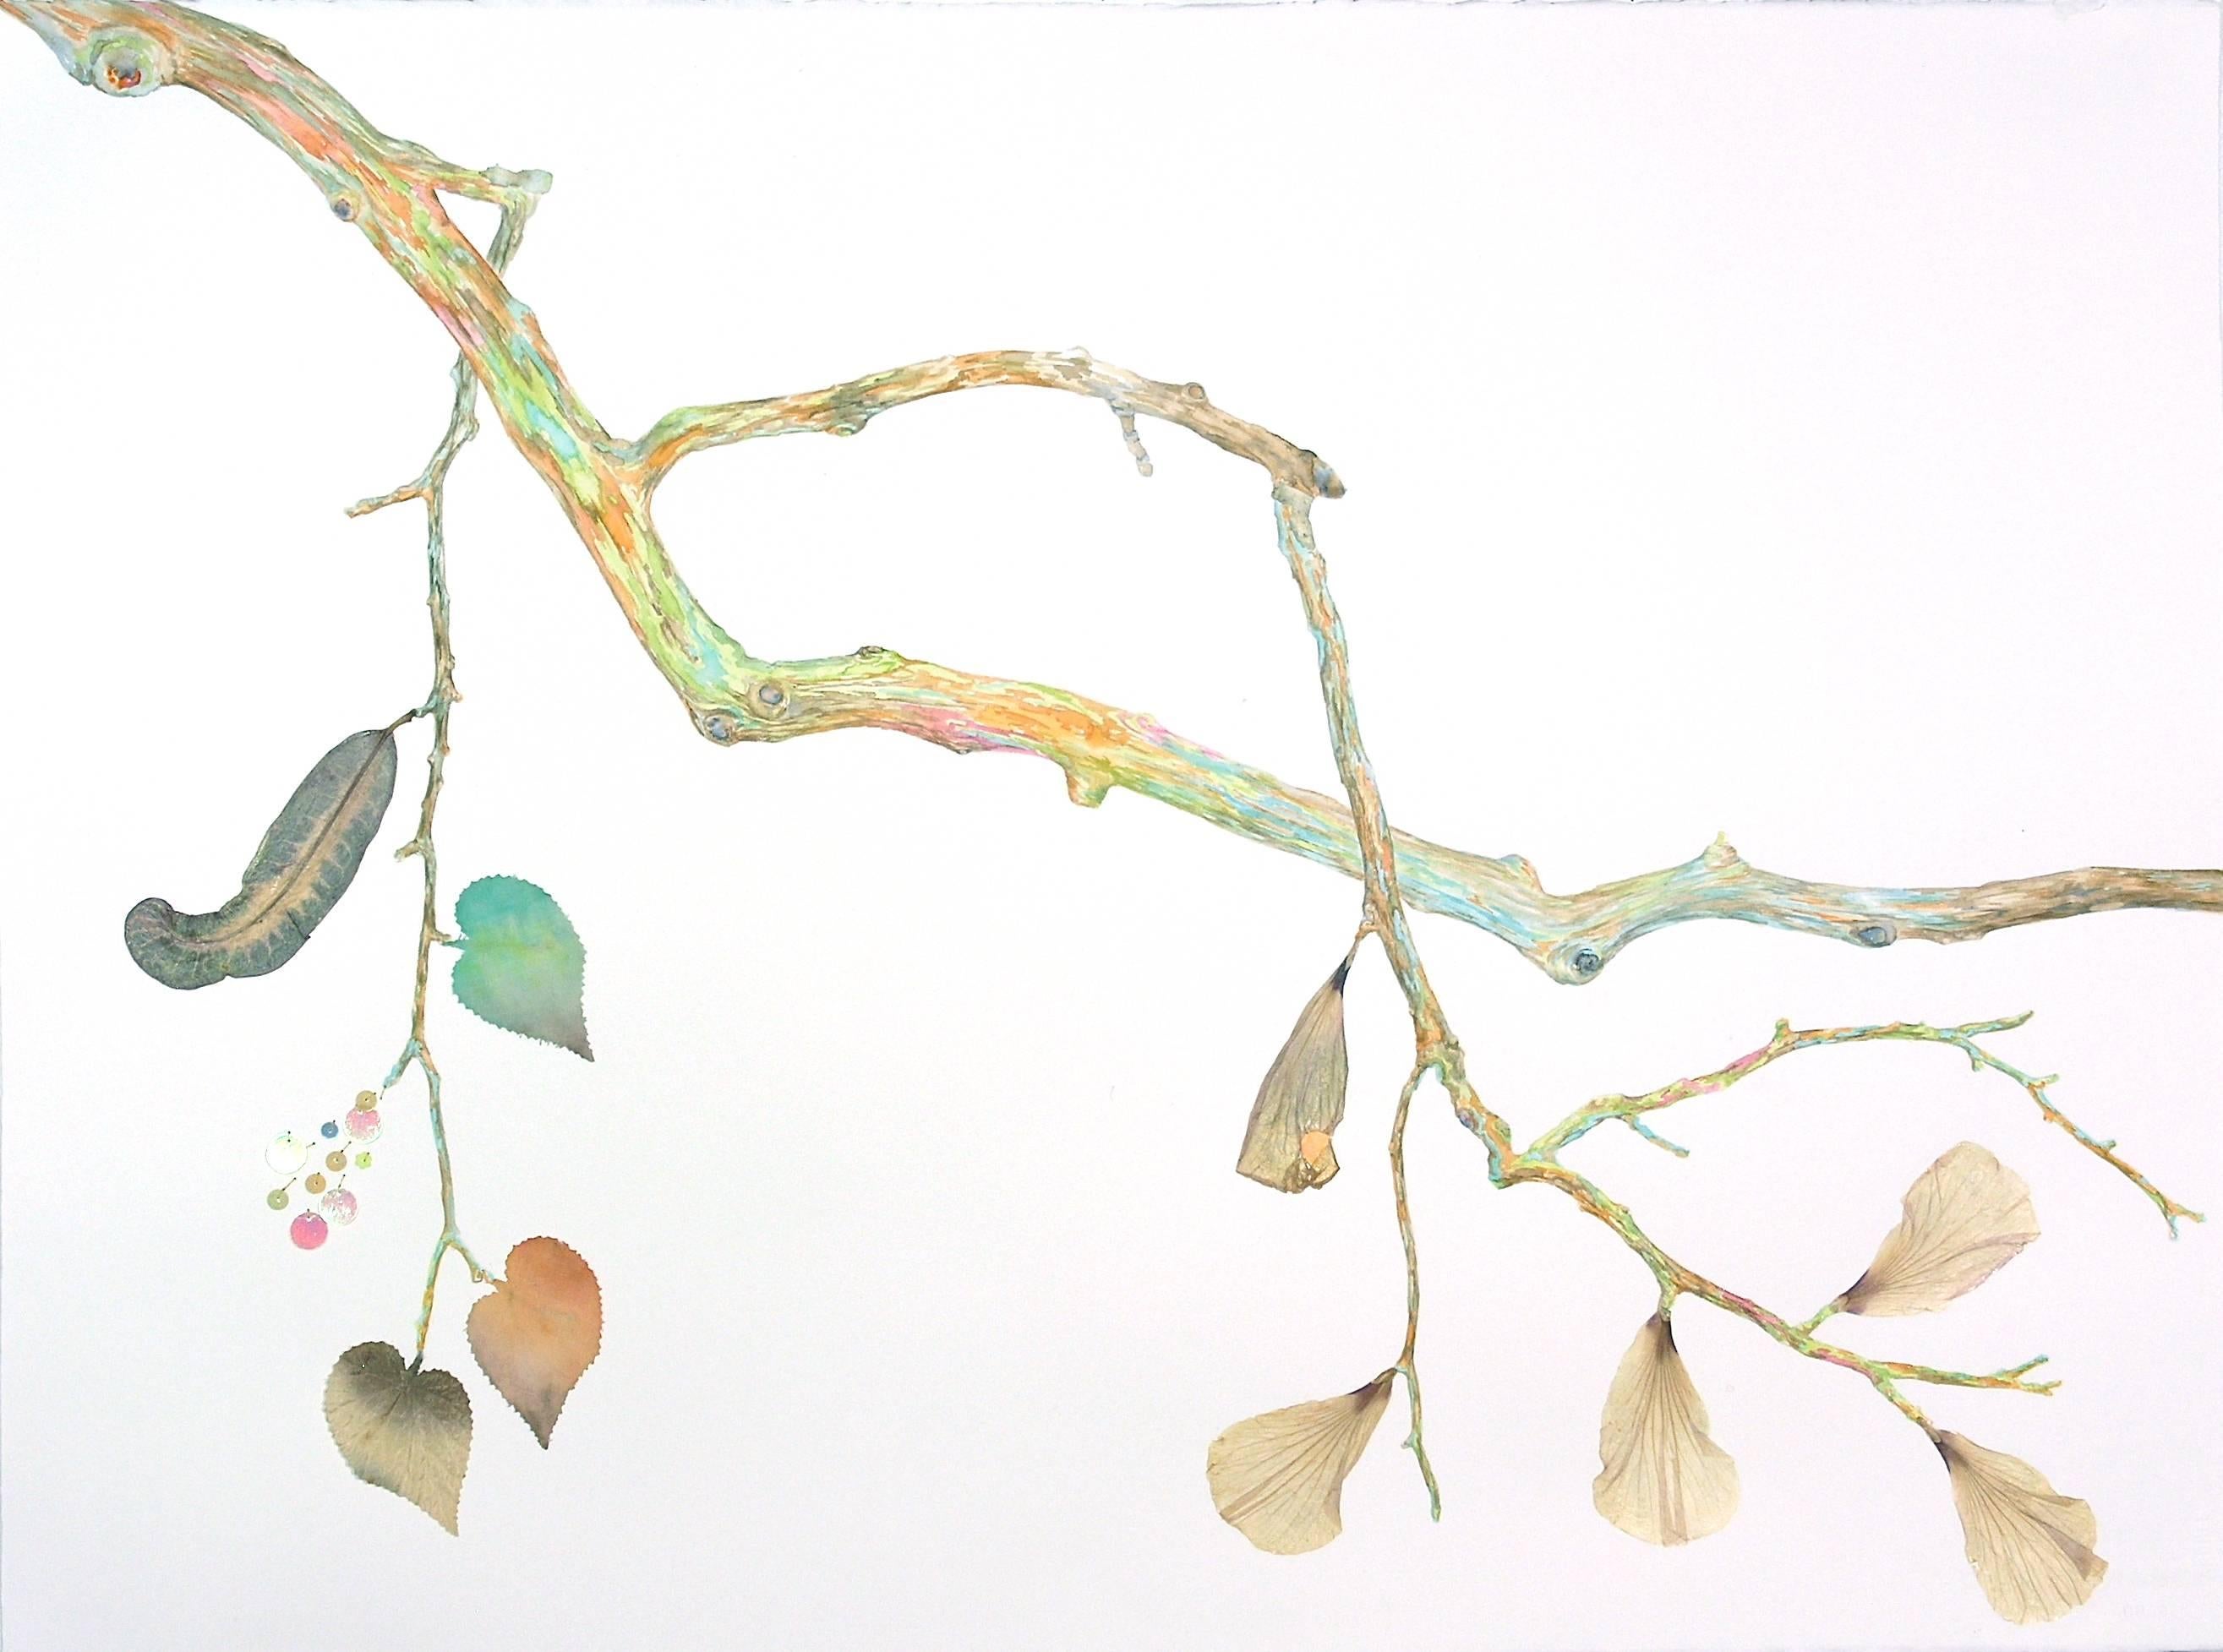 Marilla Palmer
Dangling Heavy, 2015
watercolor, foliage, thread and sequins
22 x 30 in.

This original artwork by Marilla Palmer is a a contemporary botanical, delicately painted with watercolor and collaged with pressed flowers and sequins.

There